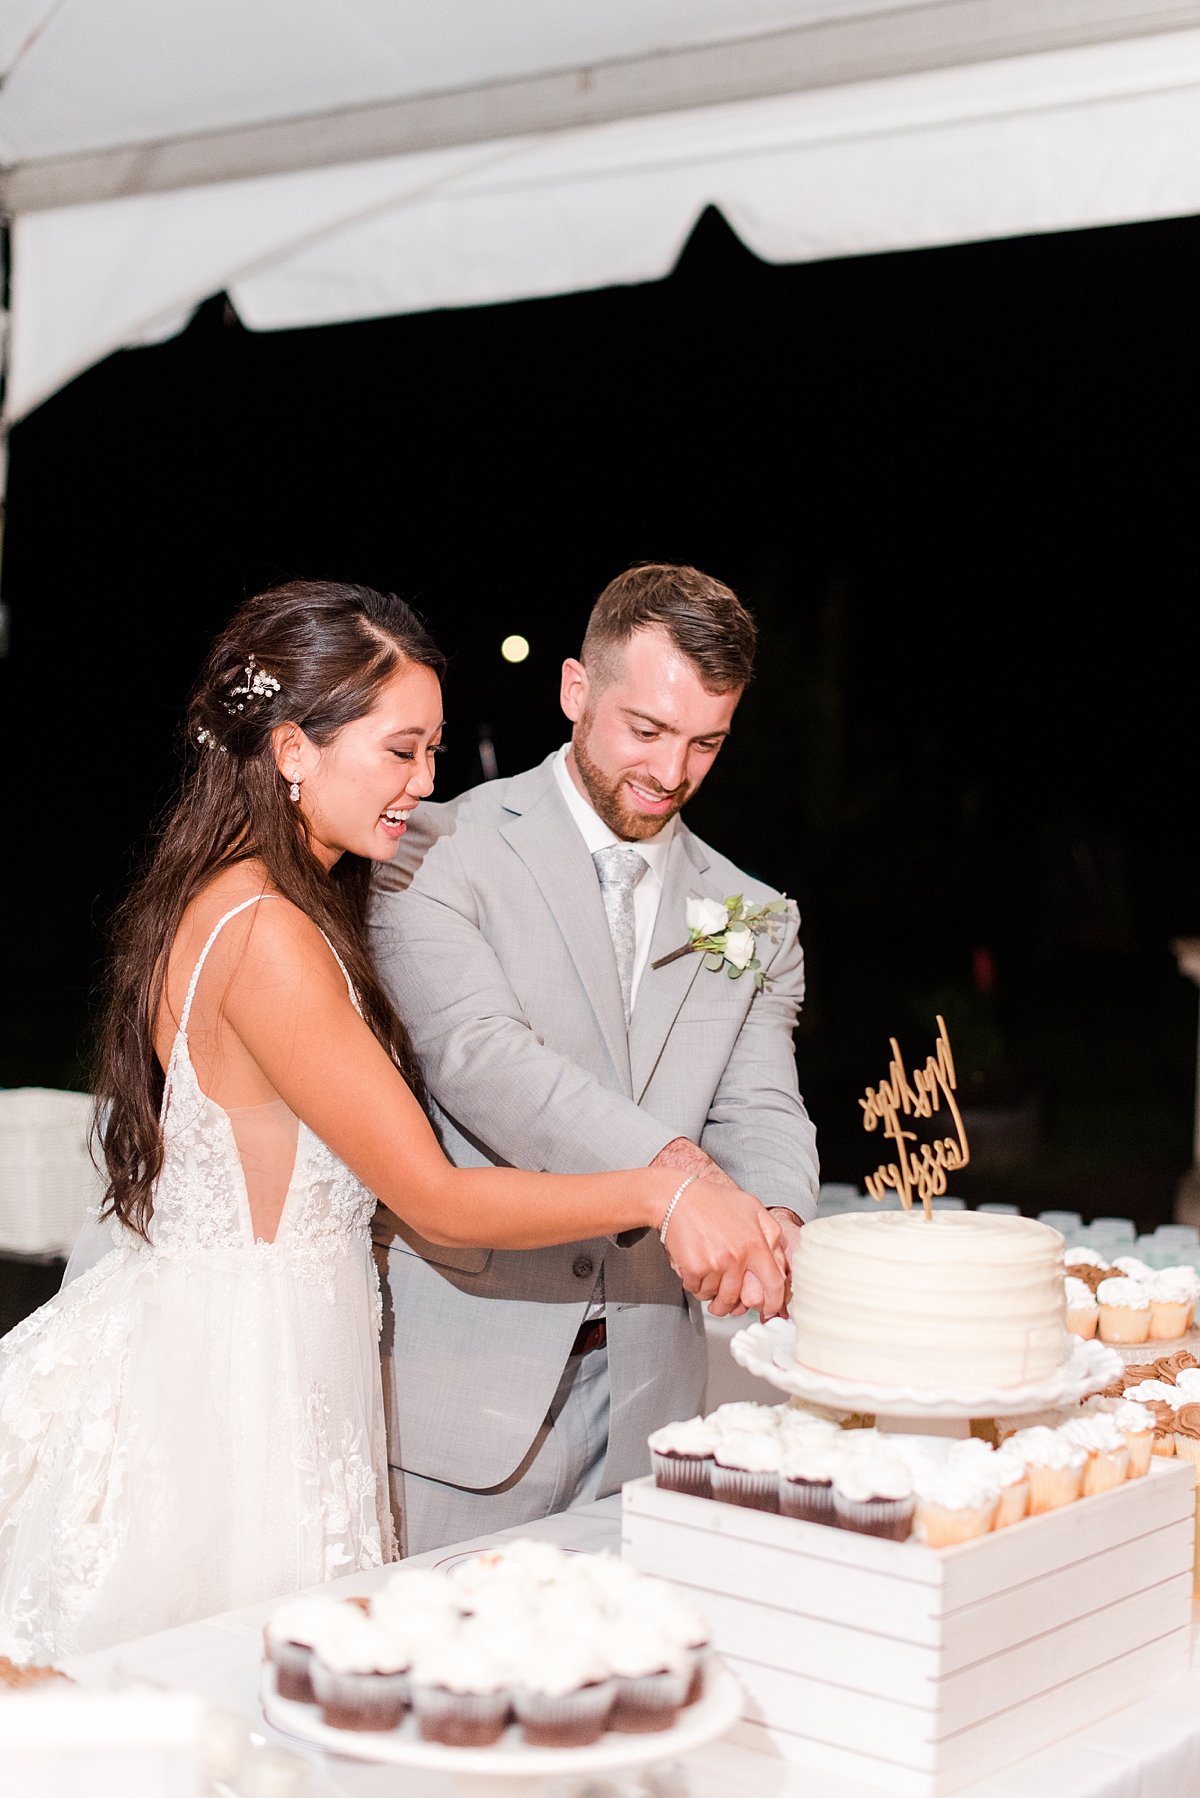 Cake Cutting at Grace Estate Winery Wedding Reception. Wedding Photography by Charlottesville Wedding Photographer Kailey Brianne Photography. 